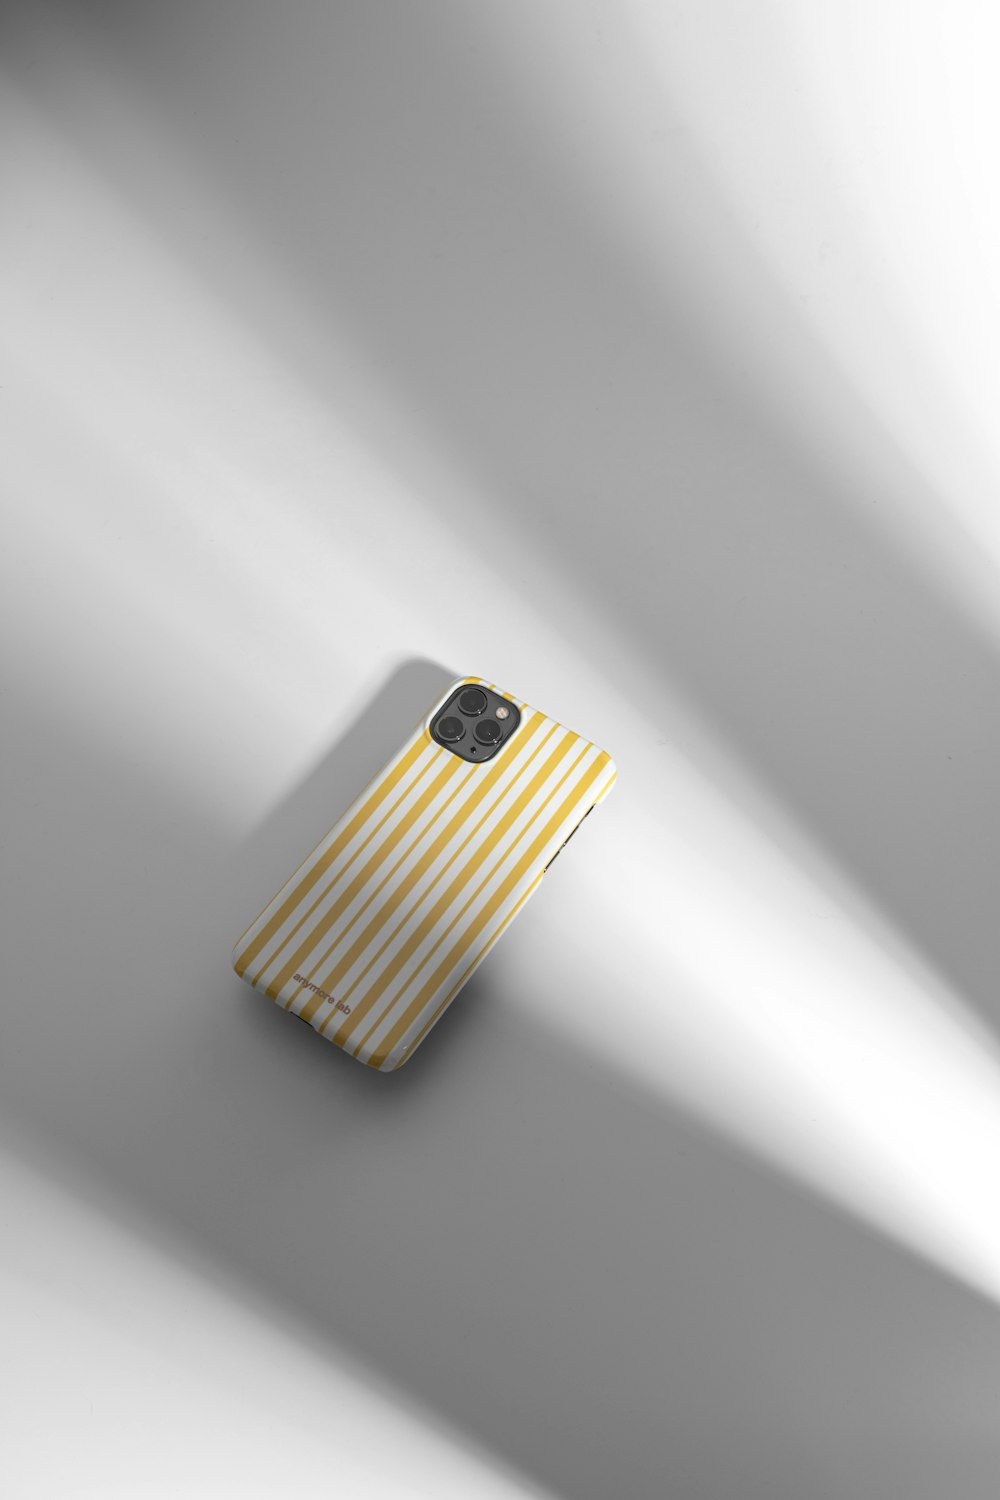 a cell phone with a yellow and white striped case